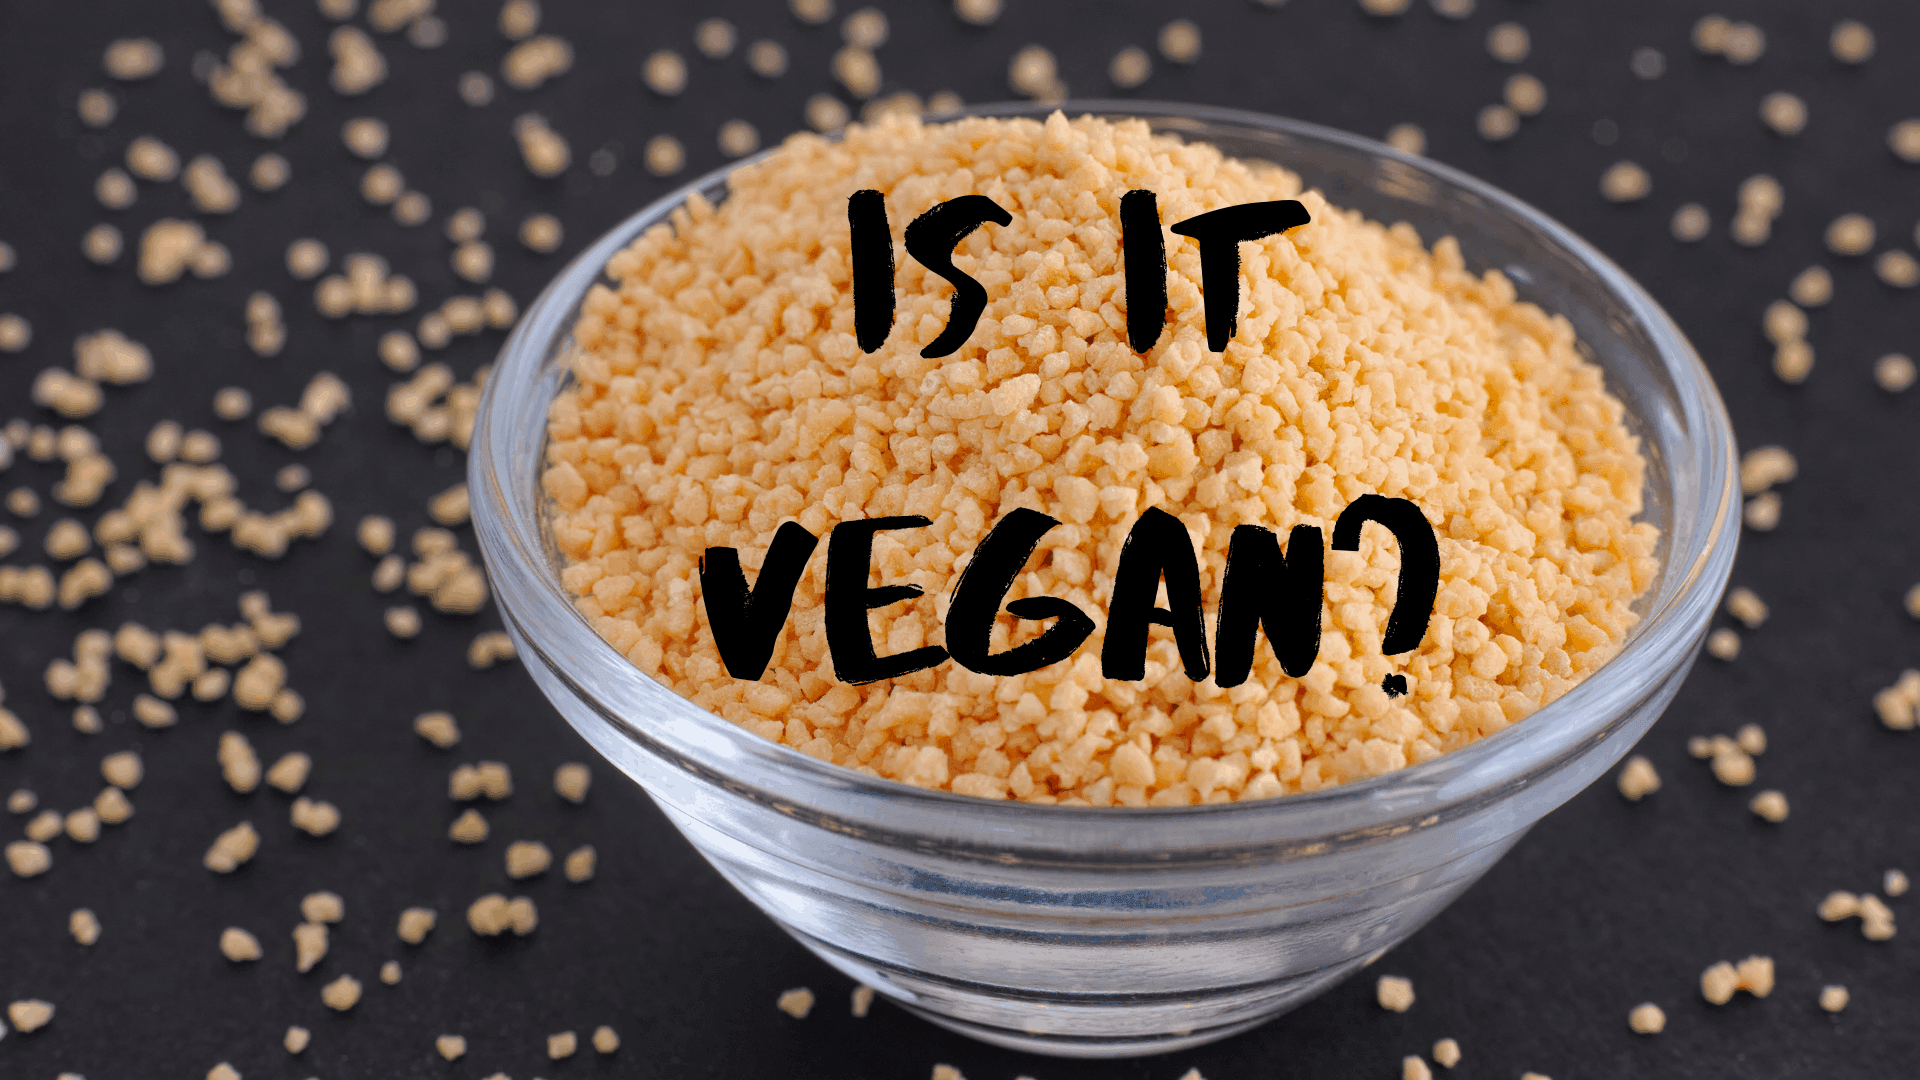 Soy lecithin in a bowl on a black table with words "IS IT VEGAN?" in black lettering over bowl